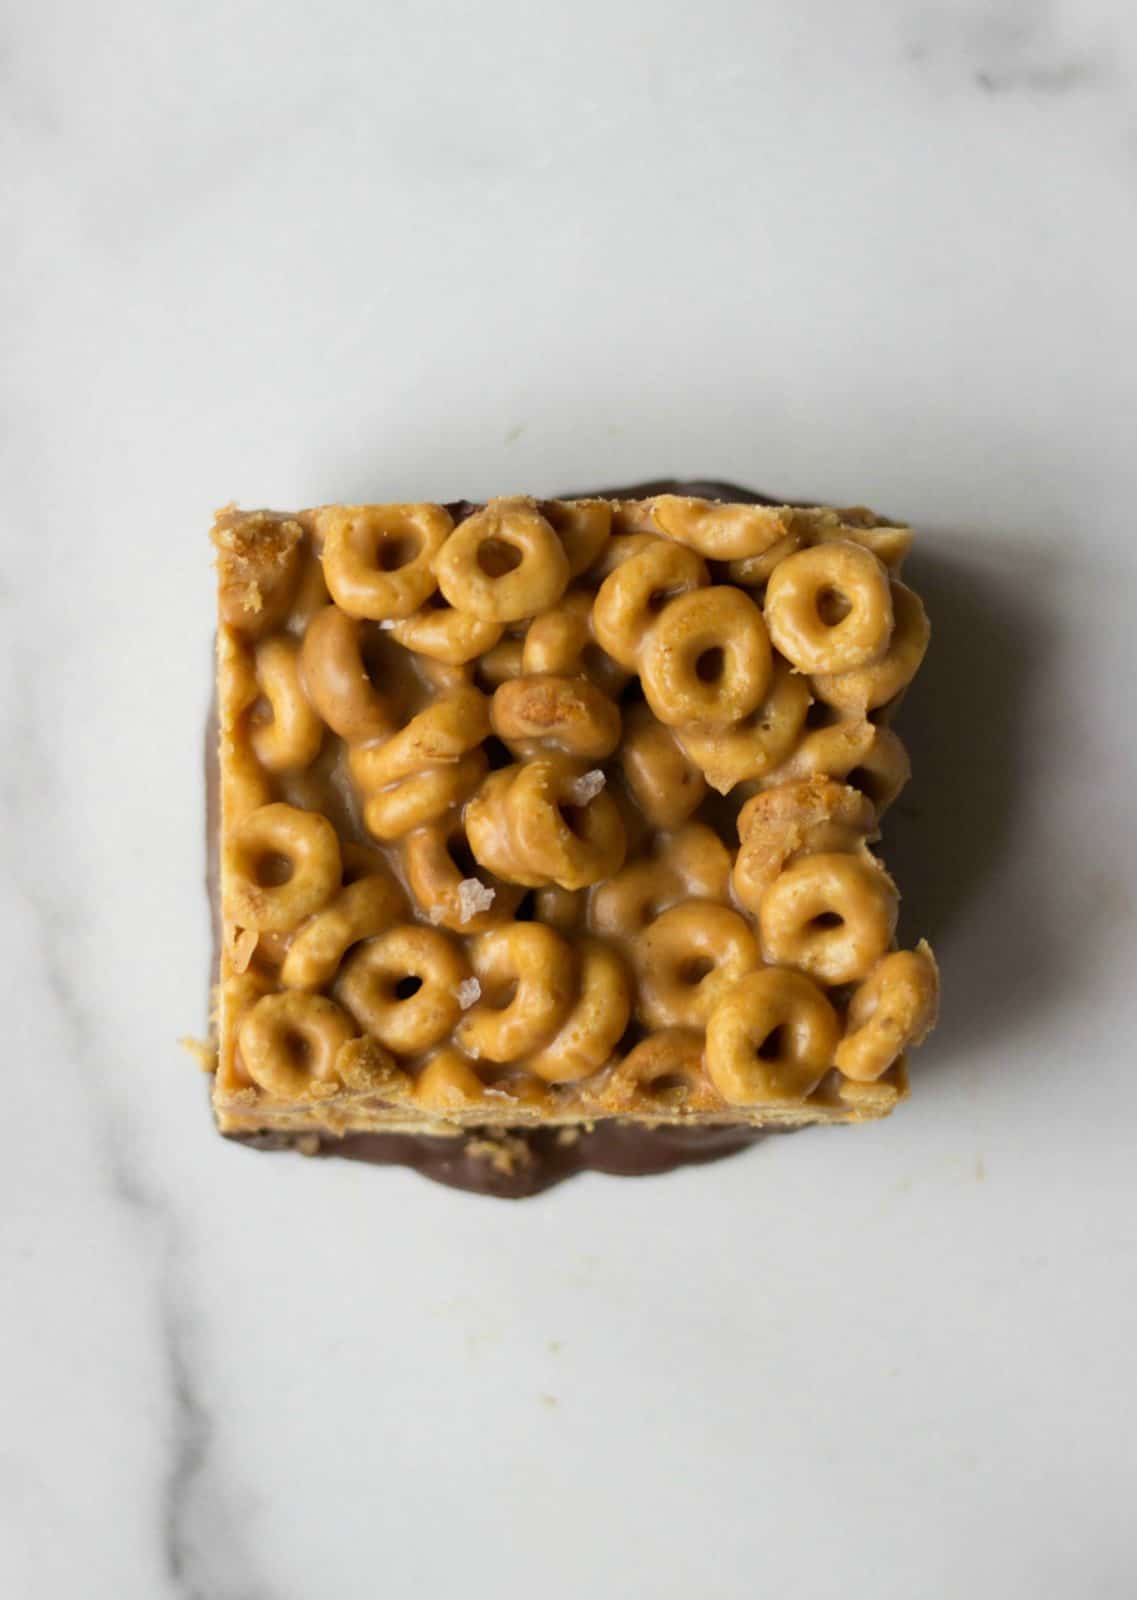 Overhead shot of one Chocolate-Dipped Peanut Butter Cereal Bar